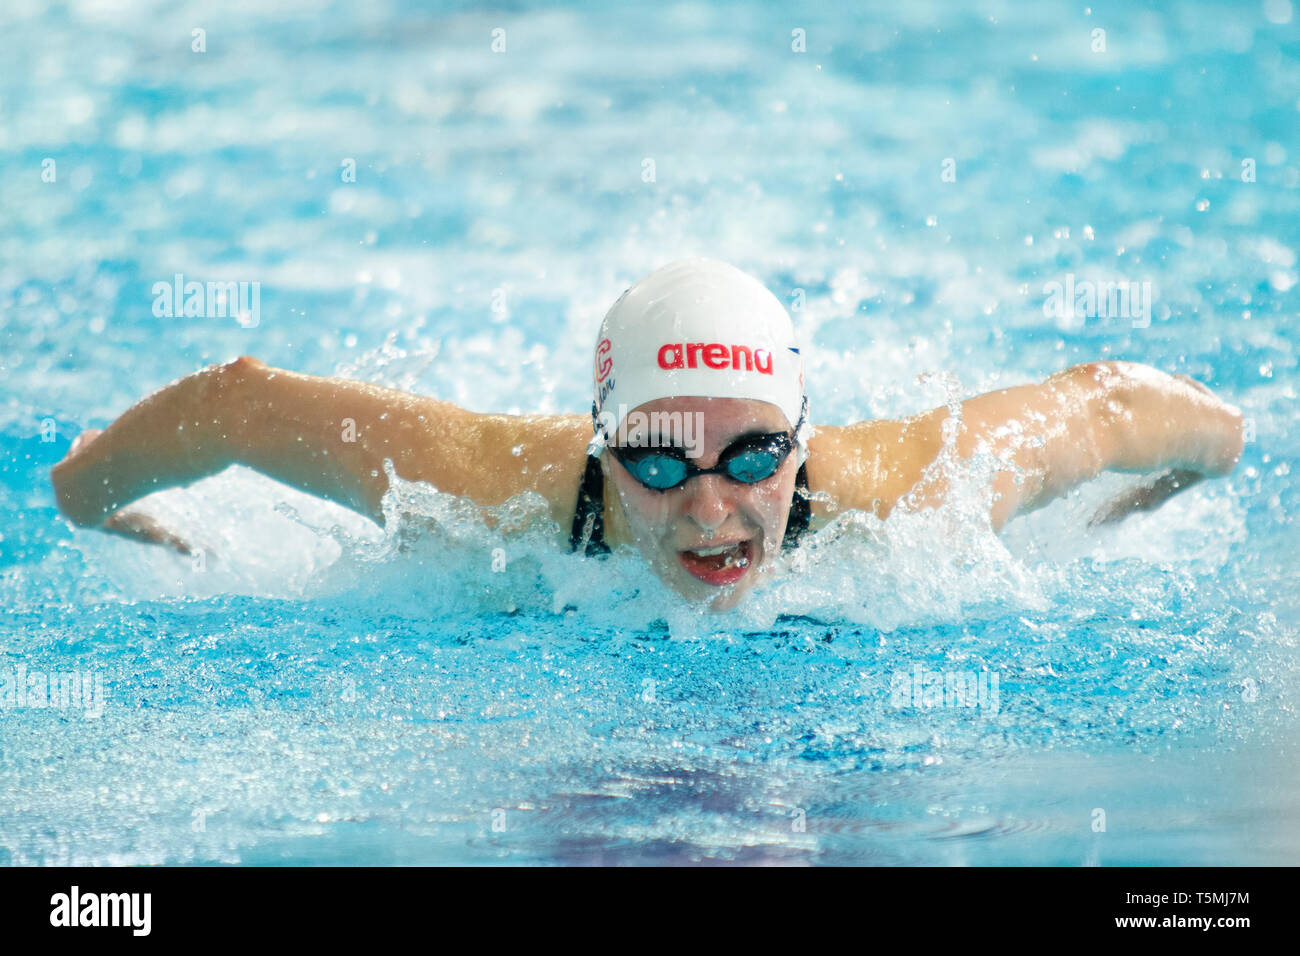 Lucy Thornton (Ealing) in action during the women's transition 200 metres butterfly final, during Day 3 of the 2019 British Swimming Championships, at Stock Photo